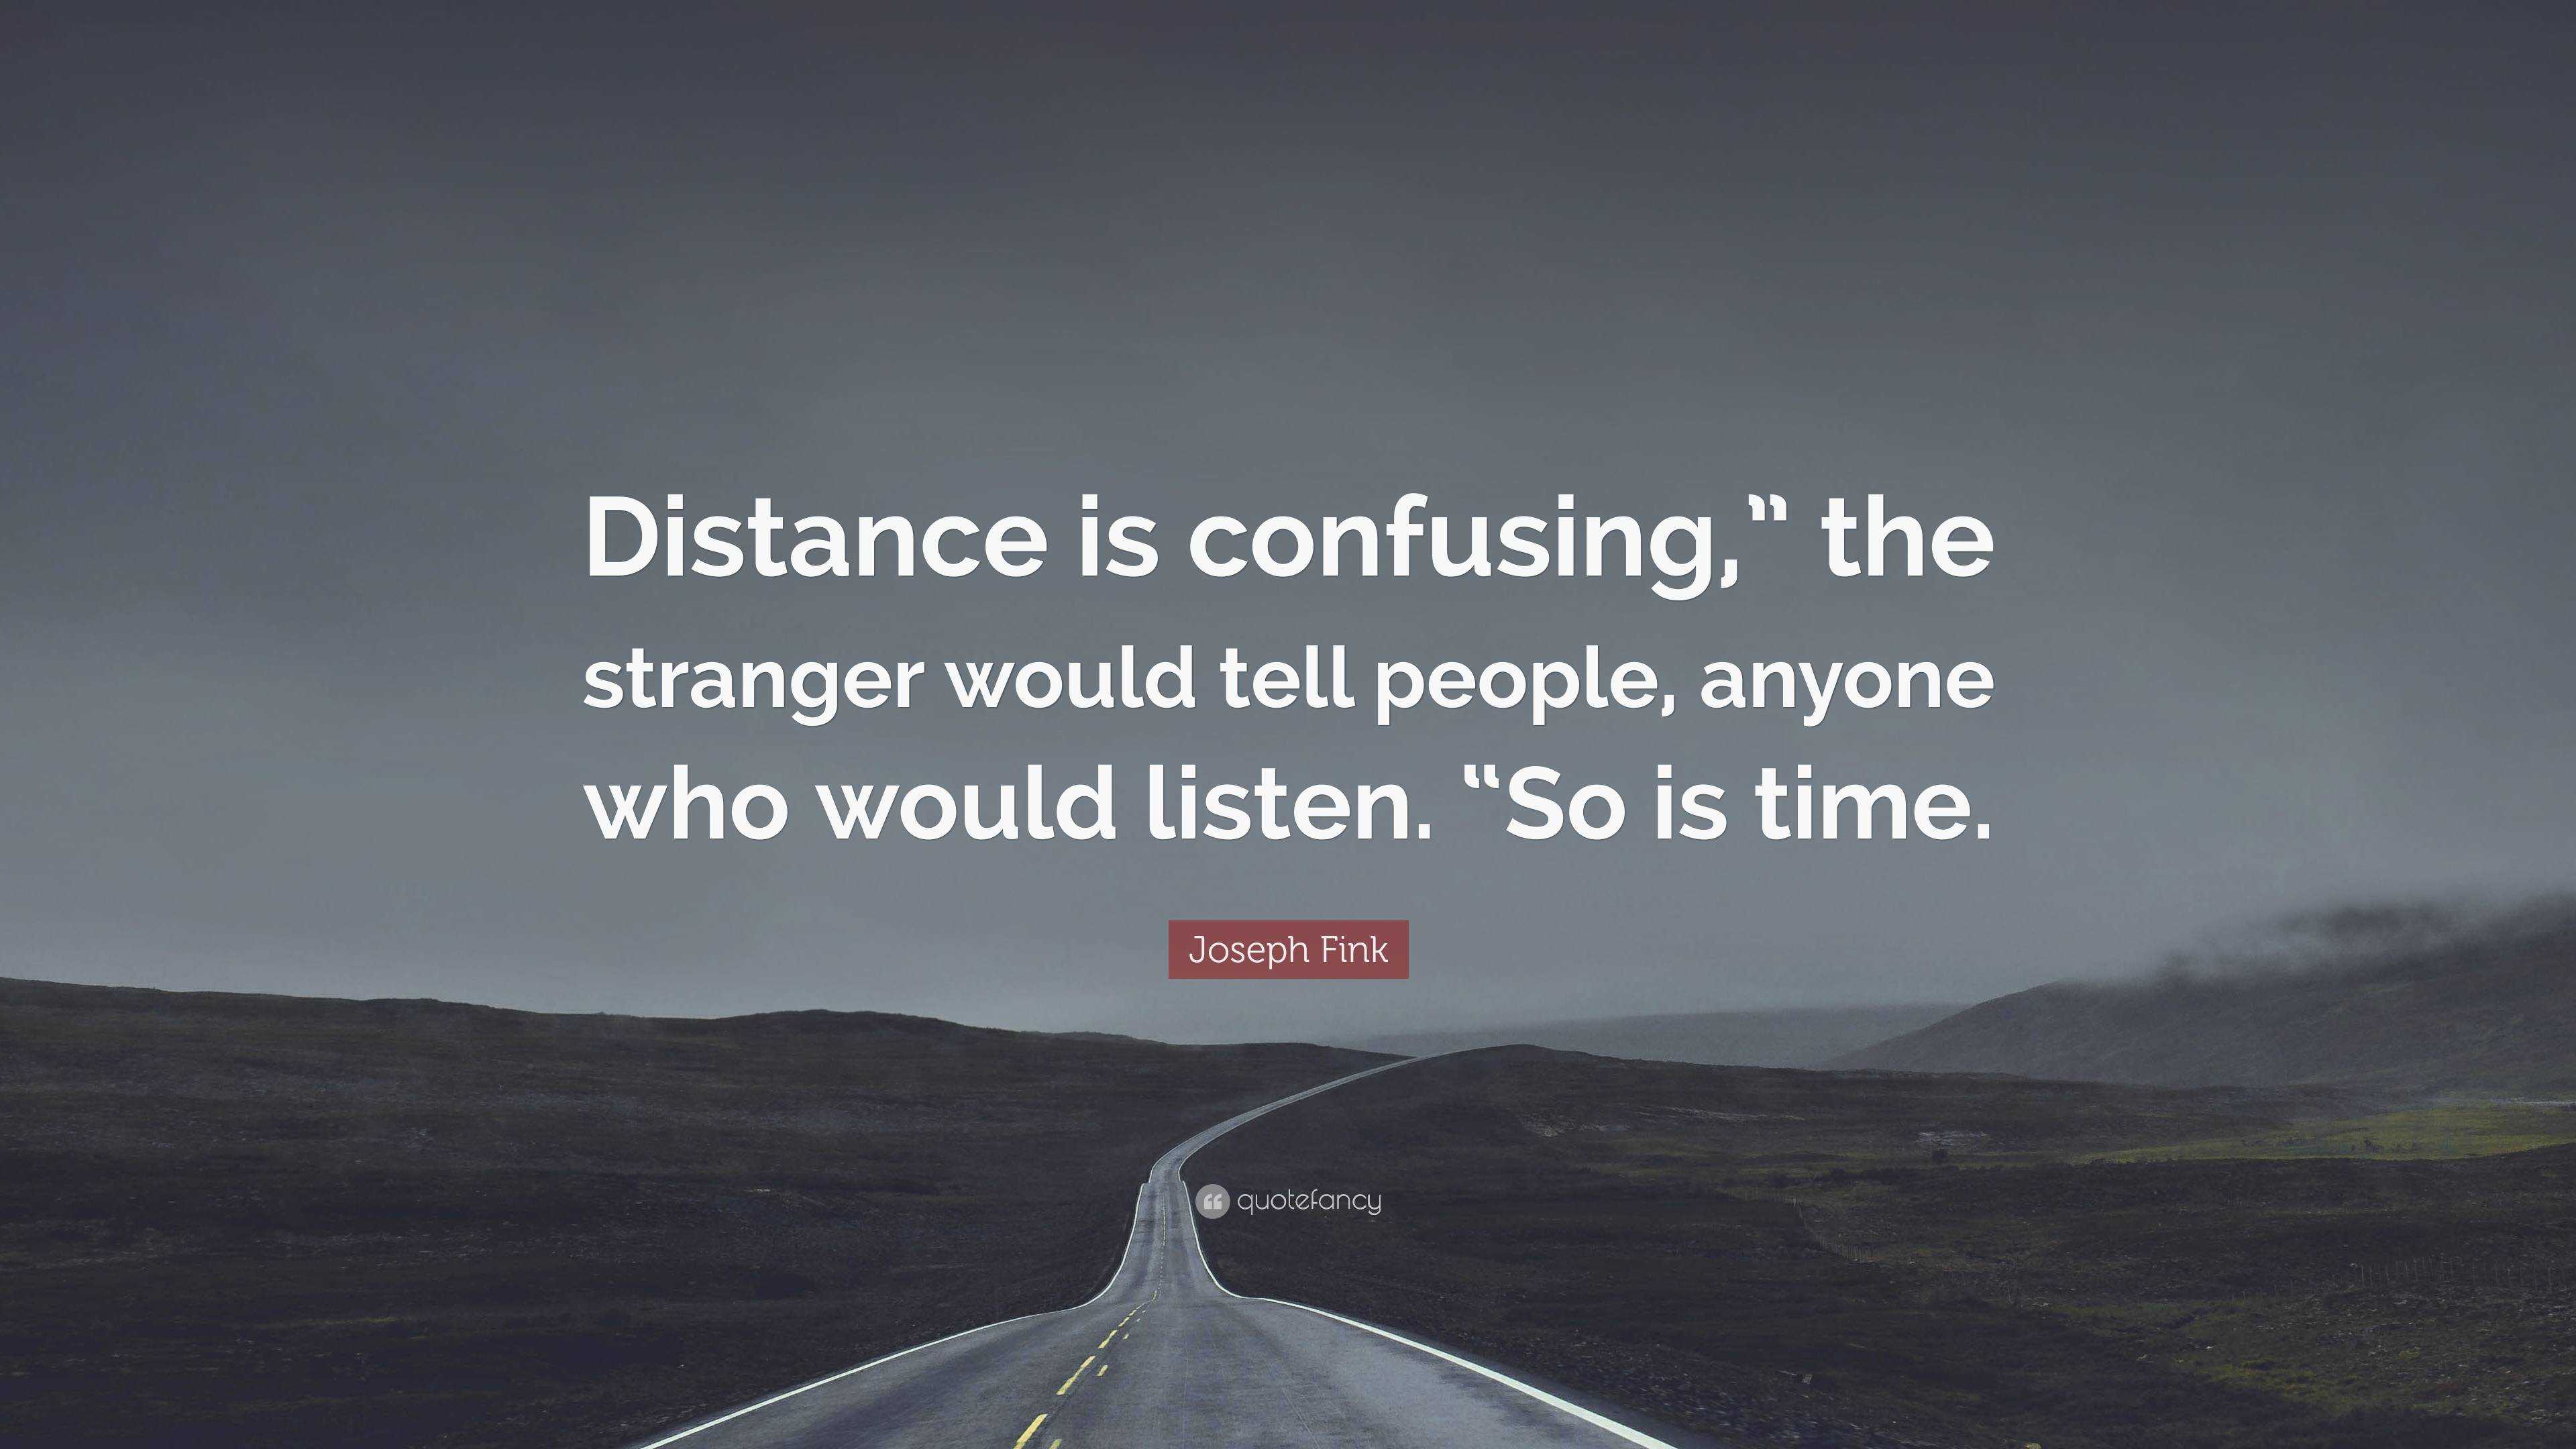 Joseph Fink Quote: “Distance is the would tell people, anyone who would listen. “So